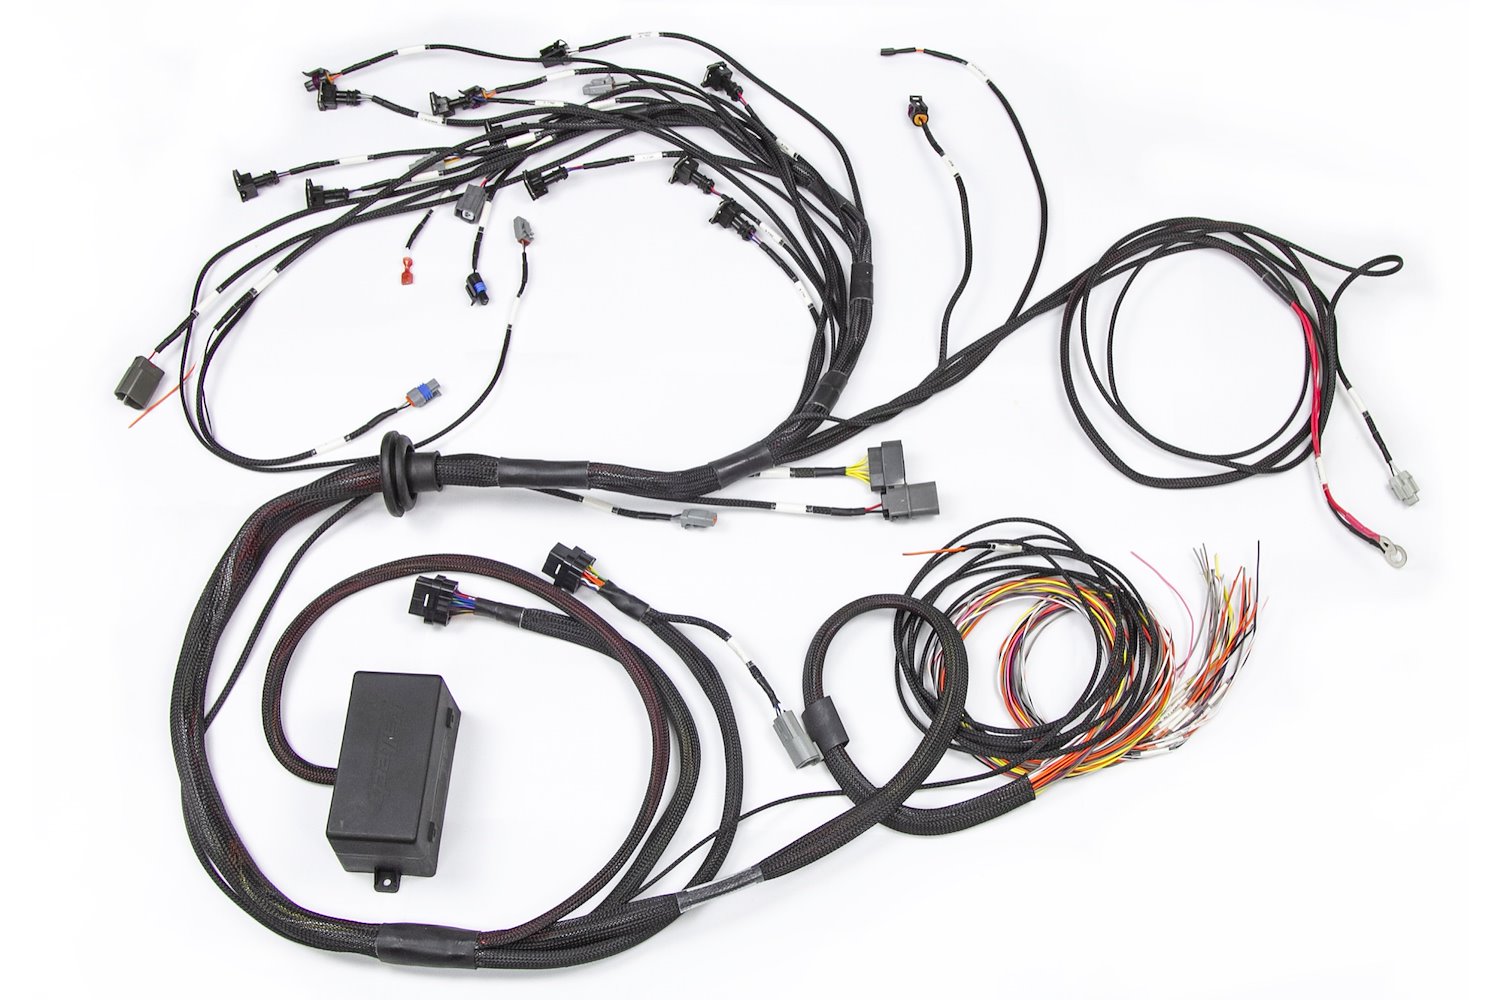 HT-130326 E2000/2500 Terminated Engine Harness Only, Nisssan RB